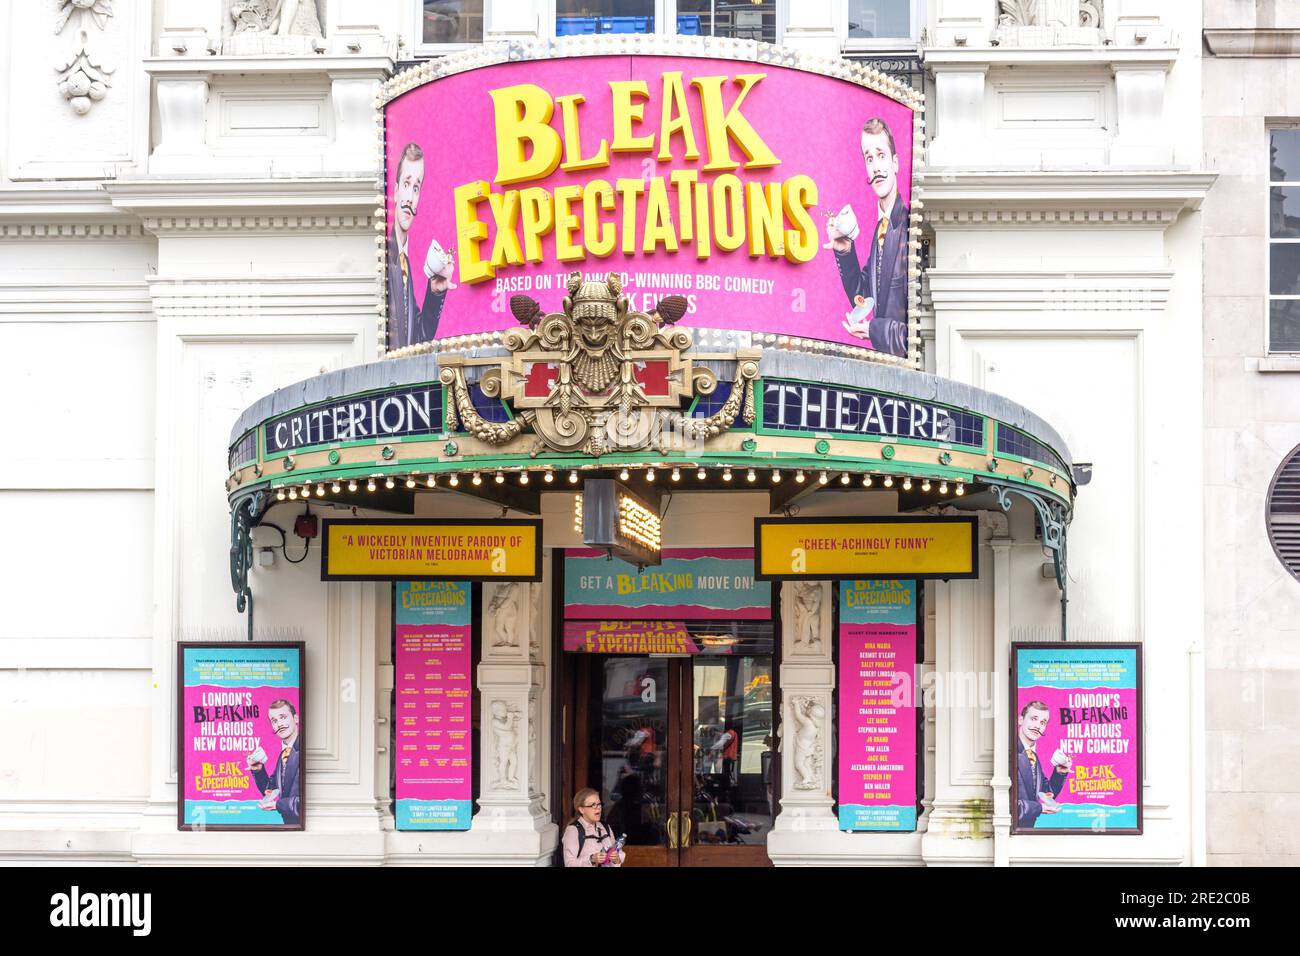 Bleak Expectations comedy at The Criterion Theatre, Piccadilly Circus, City of Westminster, Greater London, England, United Kingdom Stock Photo